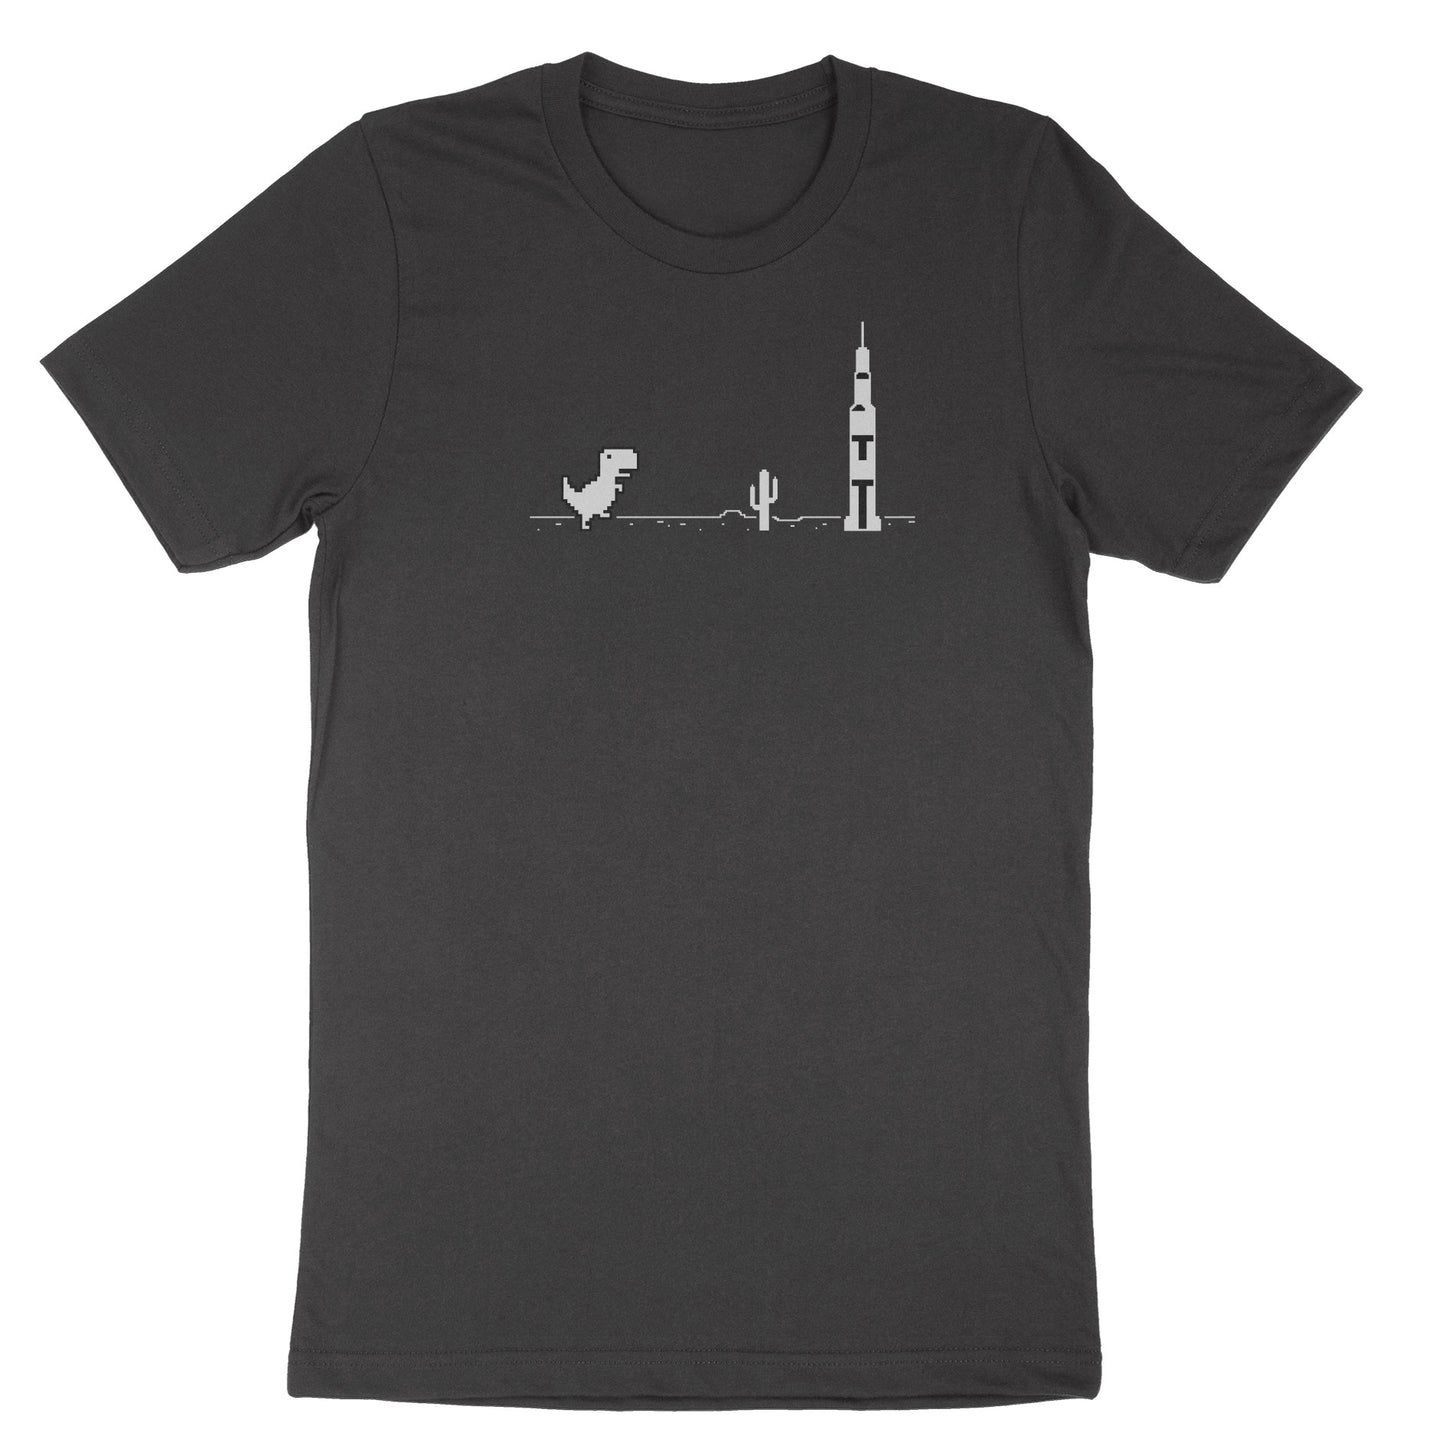 Internet dinosaur from a classic no internet game with the Saturn V rocket design on a T-Shirt